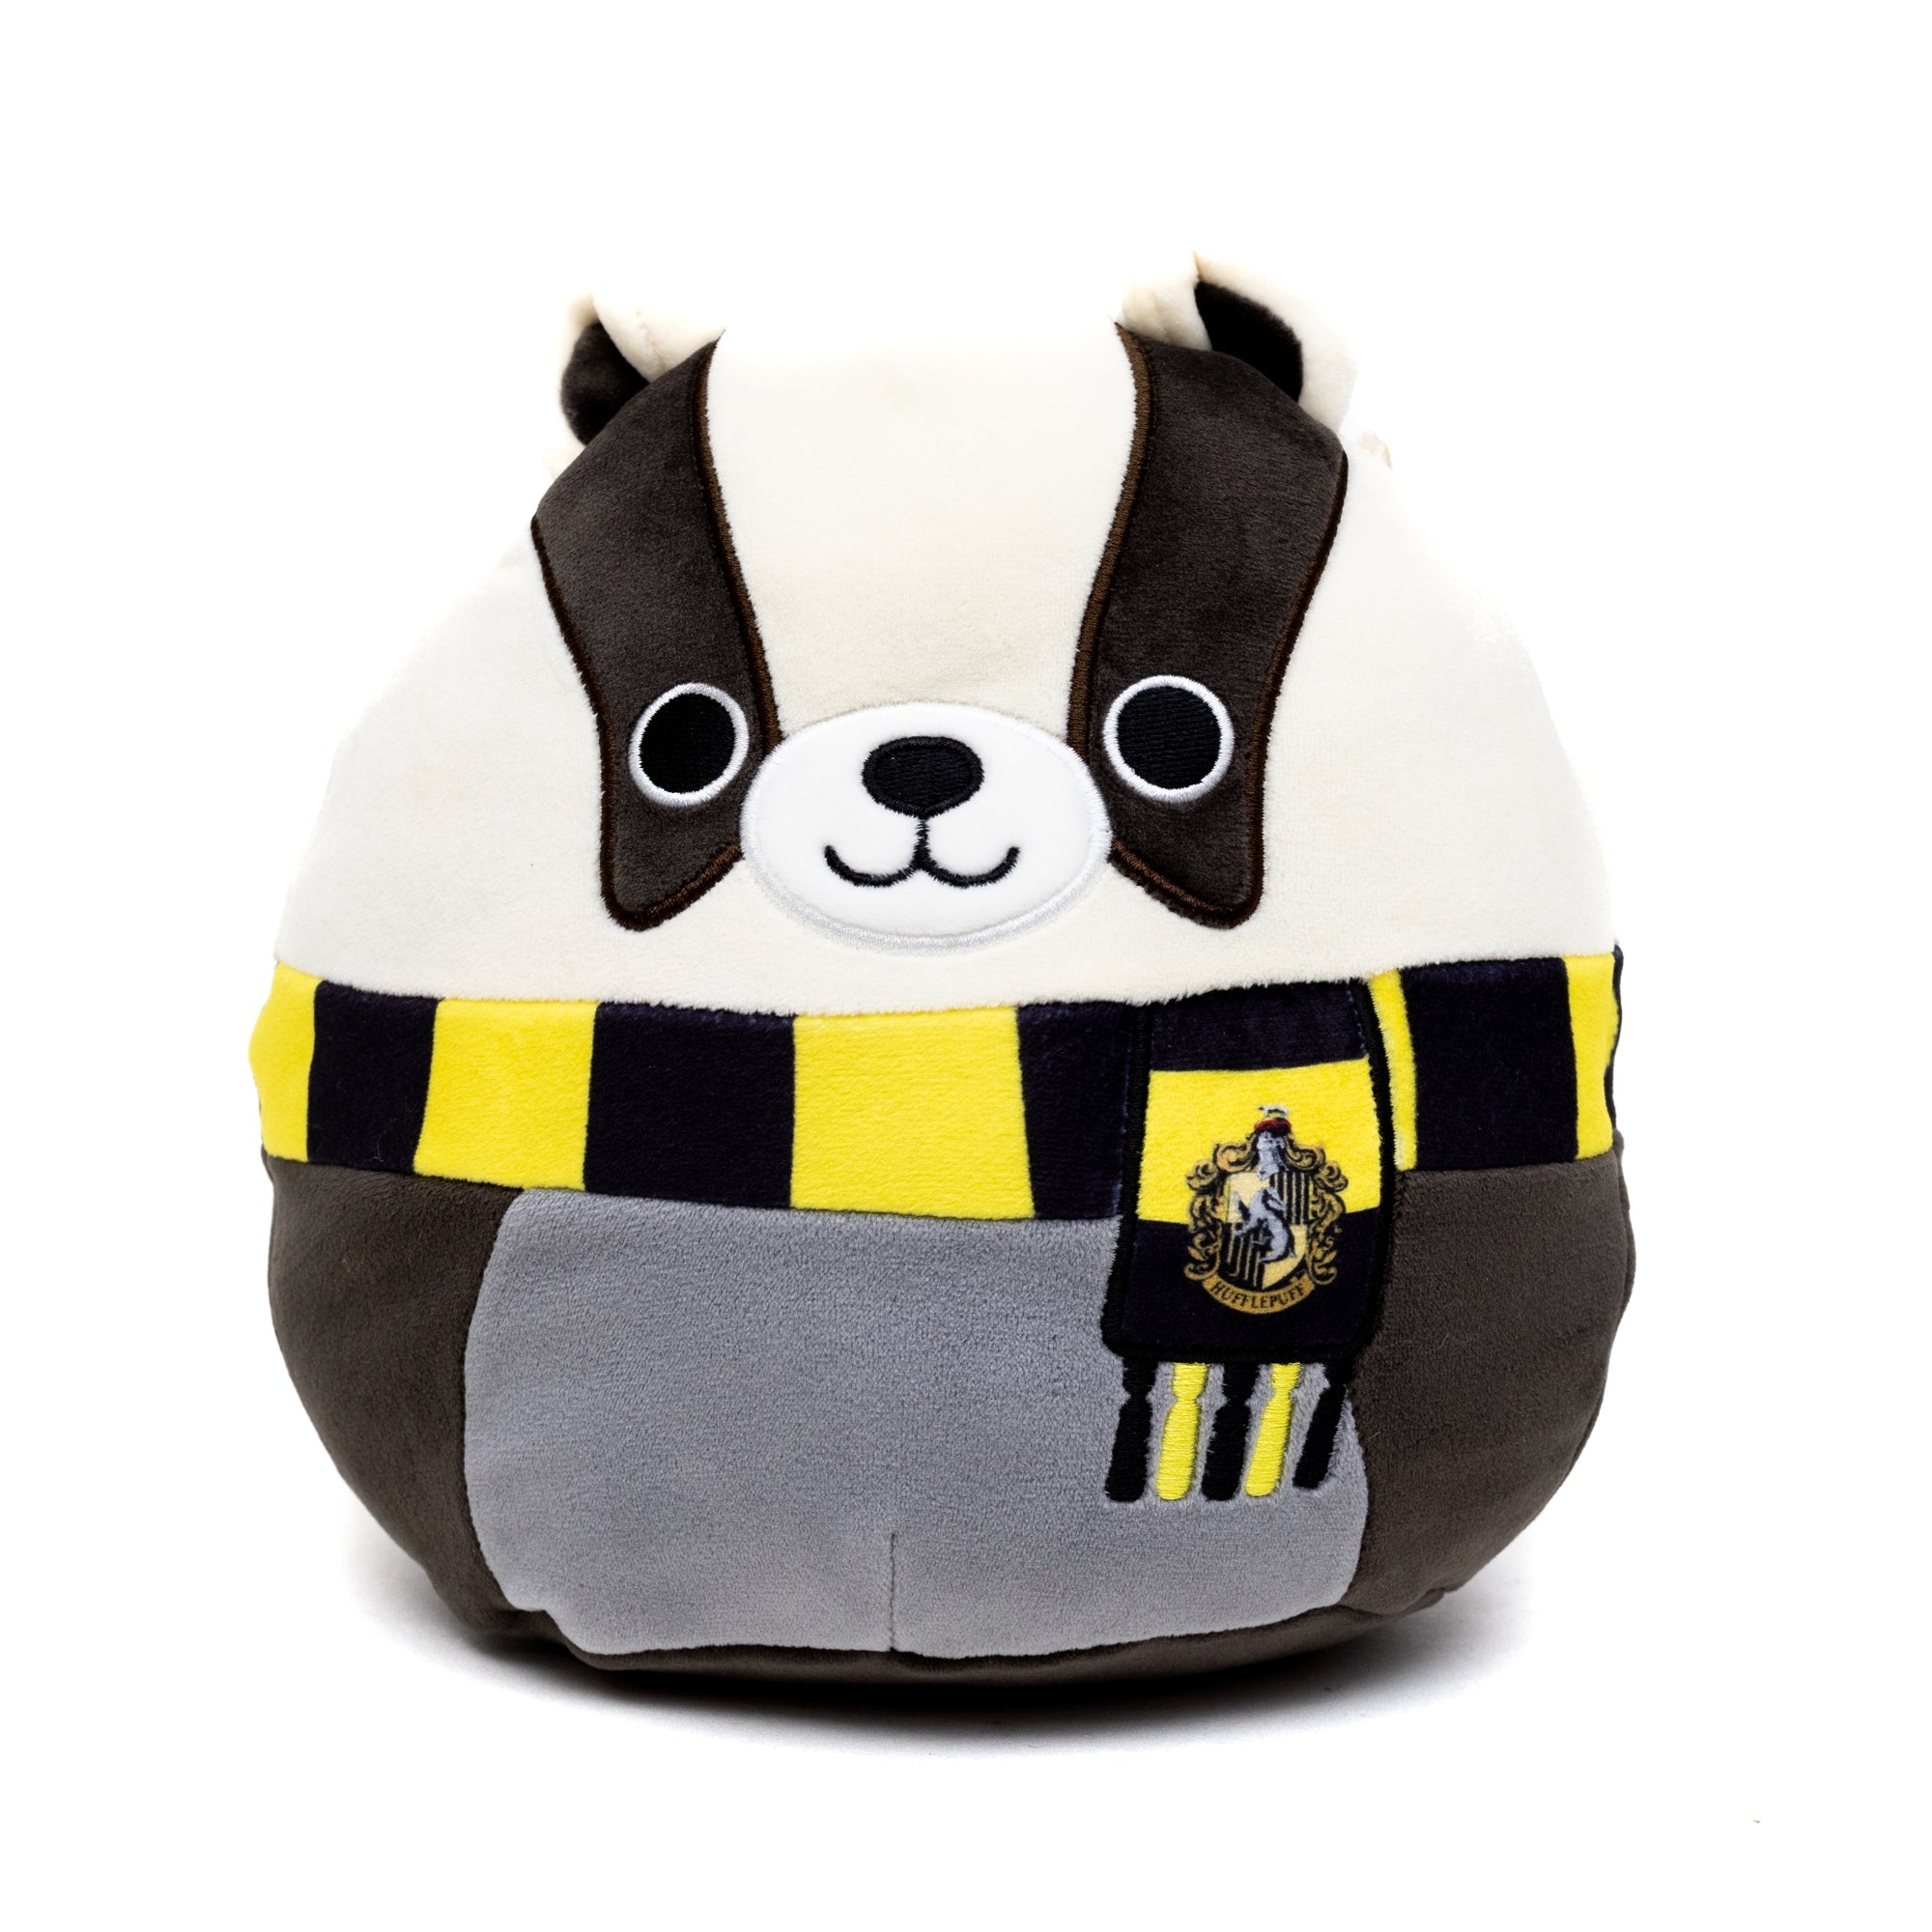 HARRY POTTER SQUISHMALLOWS - The Pop Insider